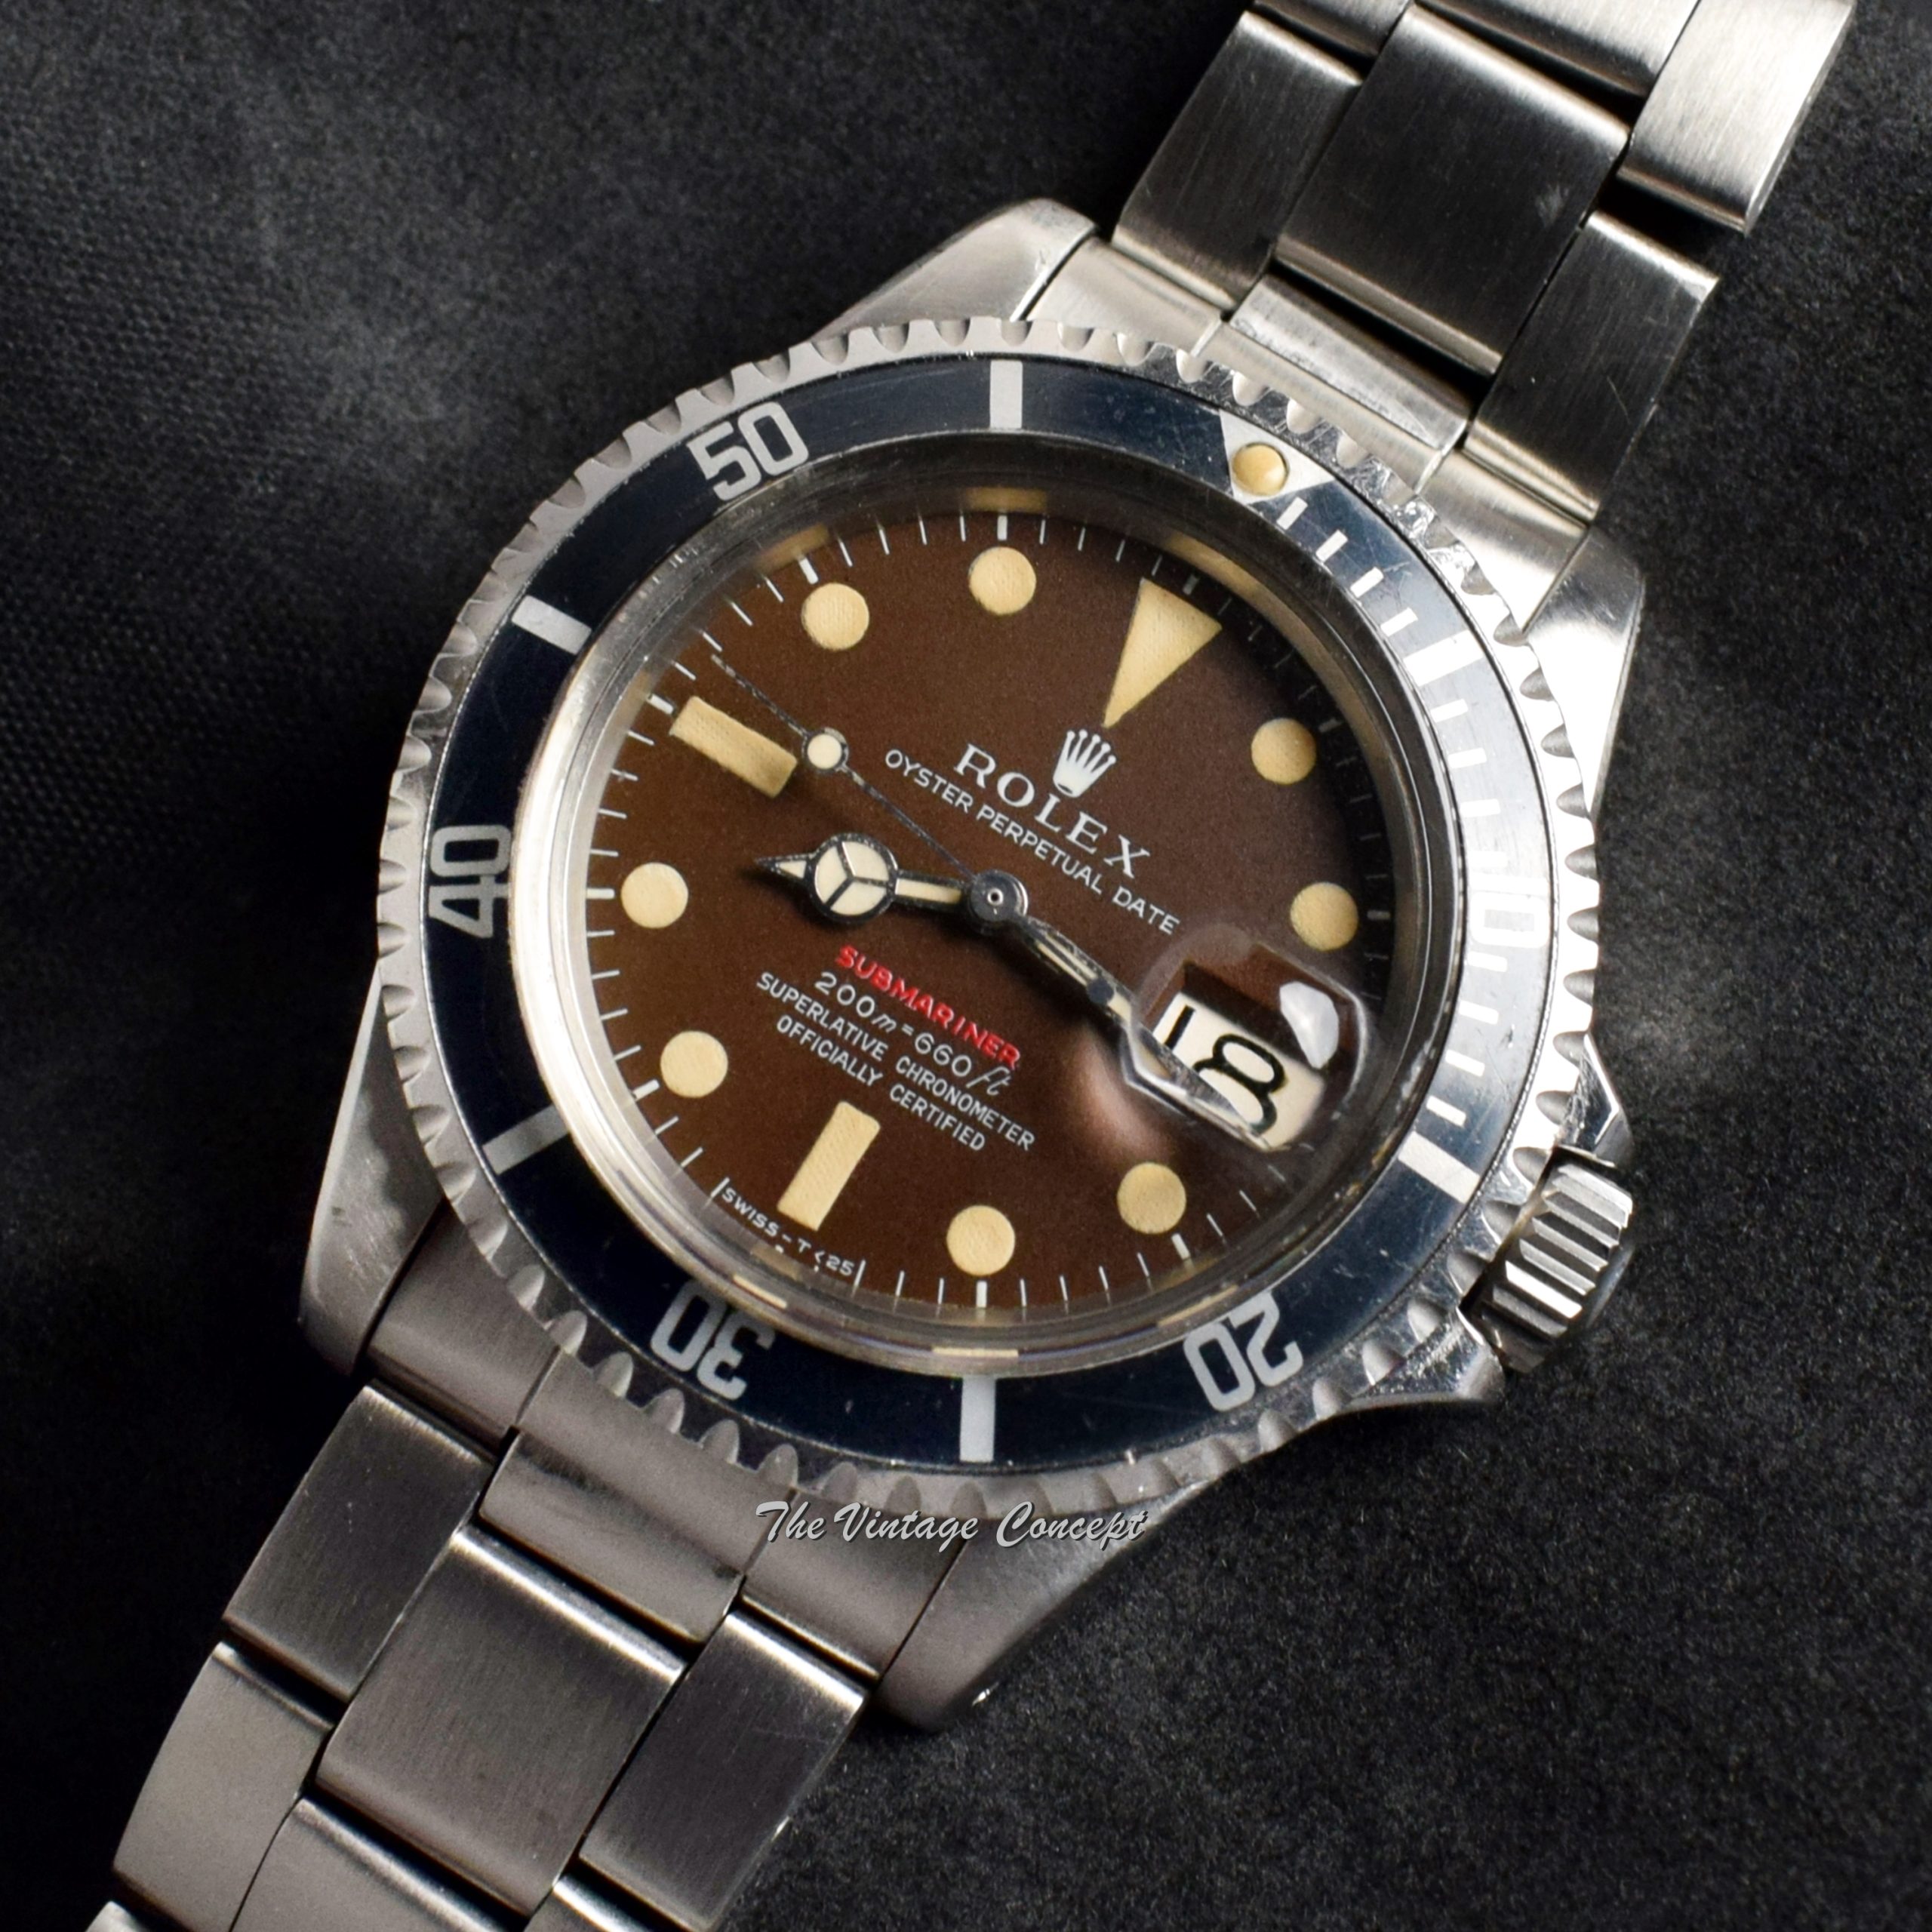 Rolex Submariner Single Red MK II Tropical Dial 1680 (SOLD) - The